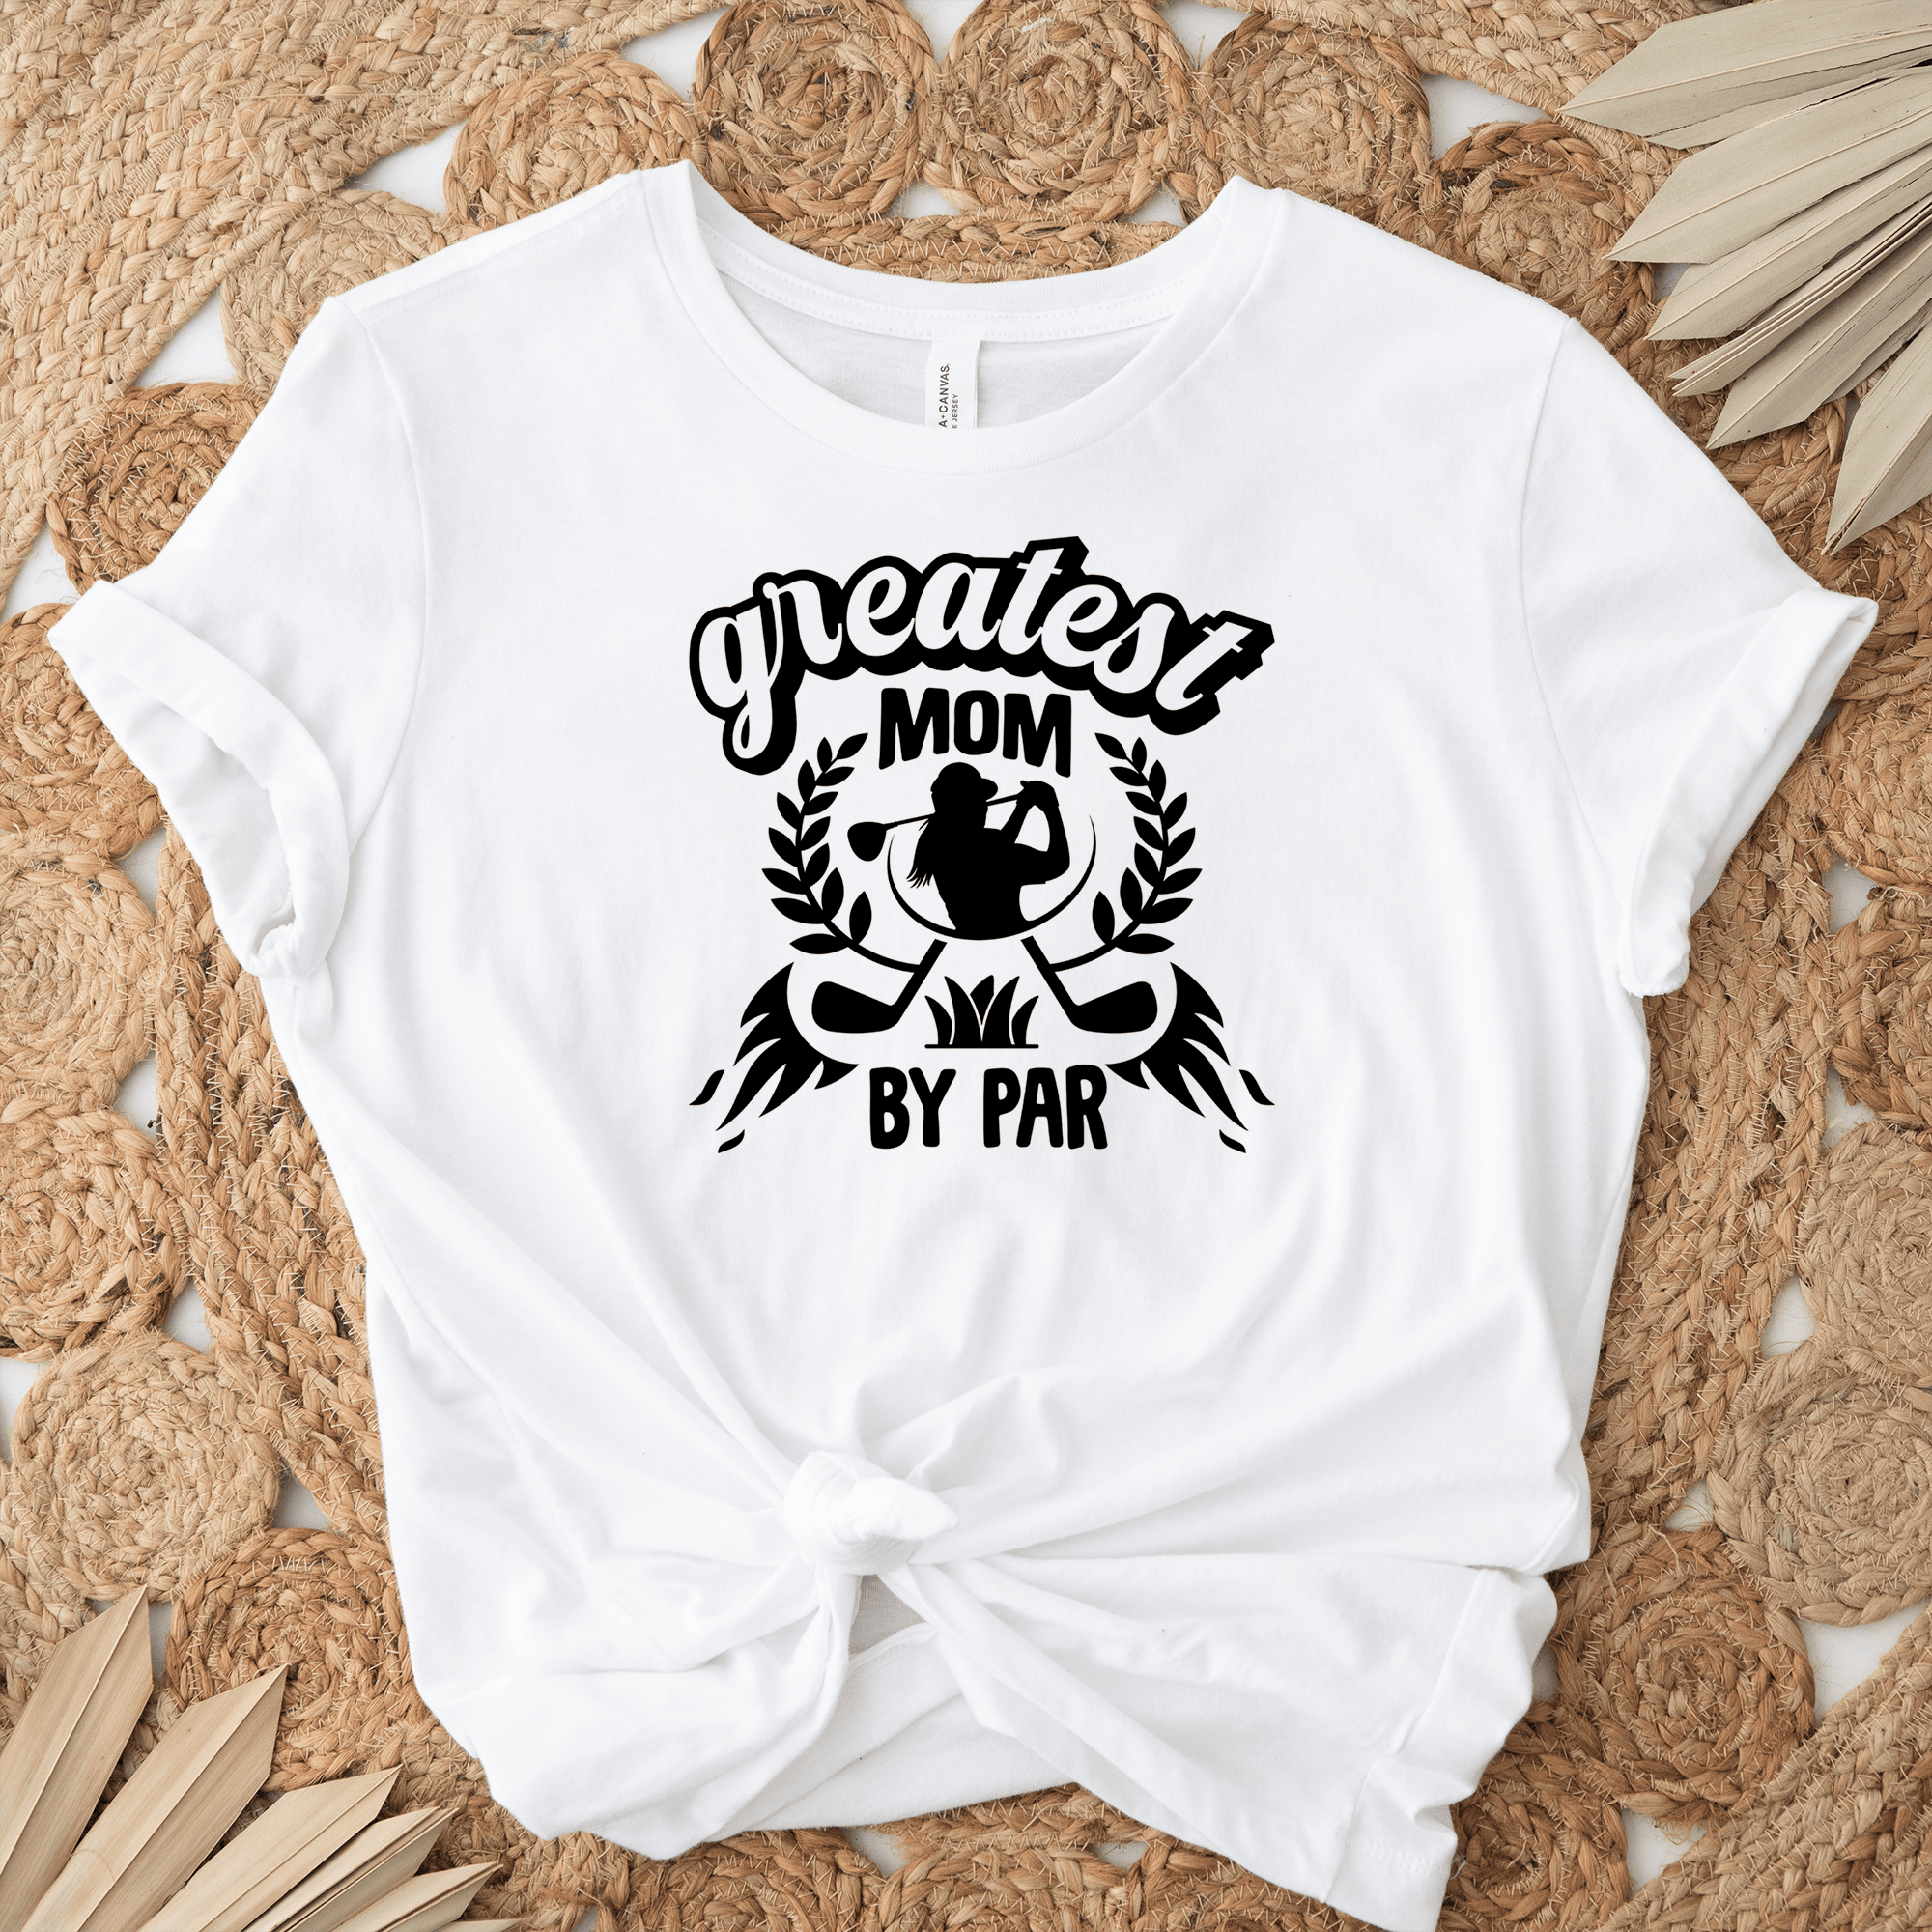 Womens White T Shirt with Greatest-Golf-Mom-By-Par design